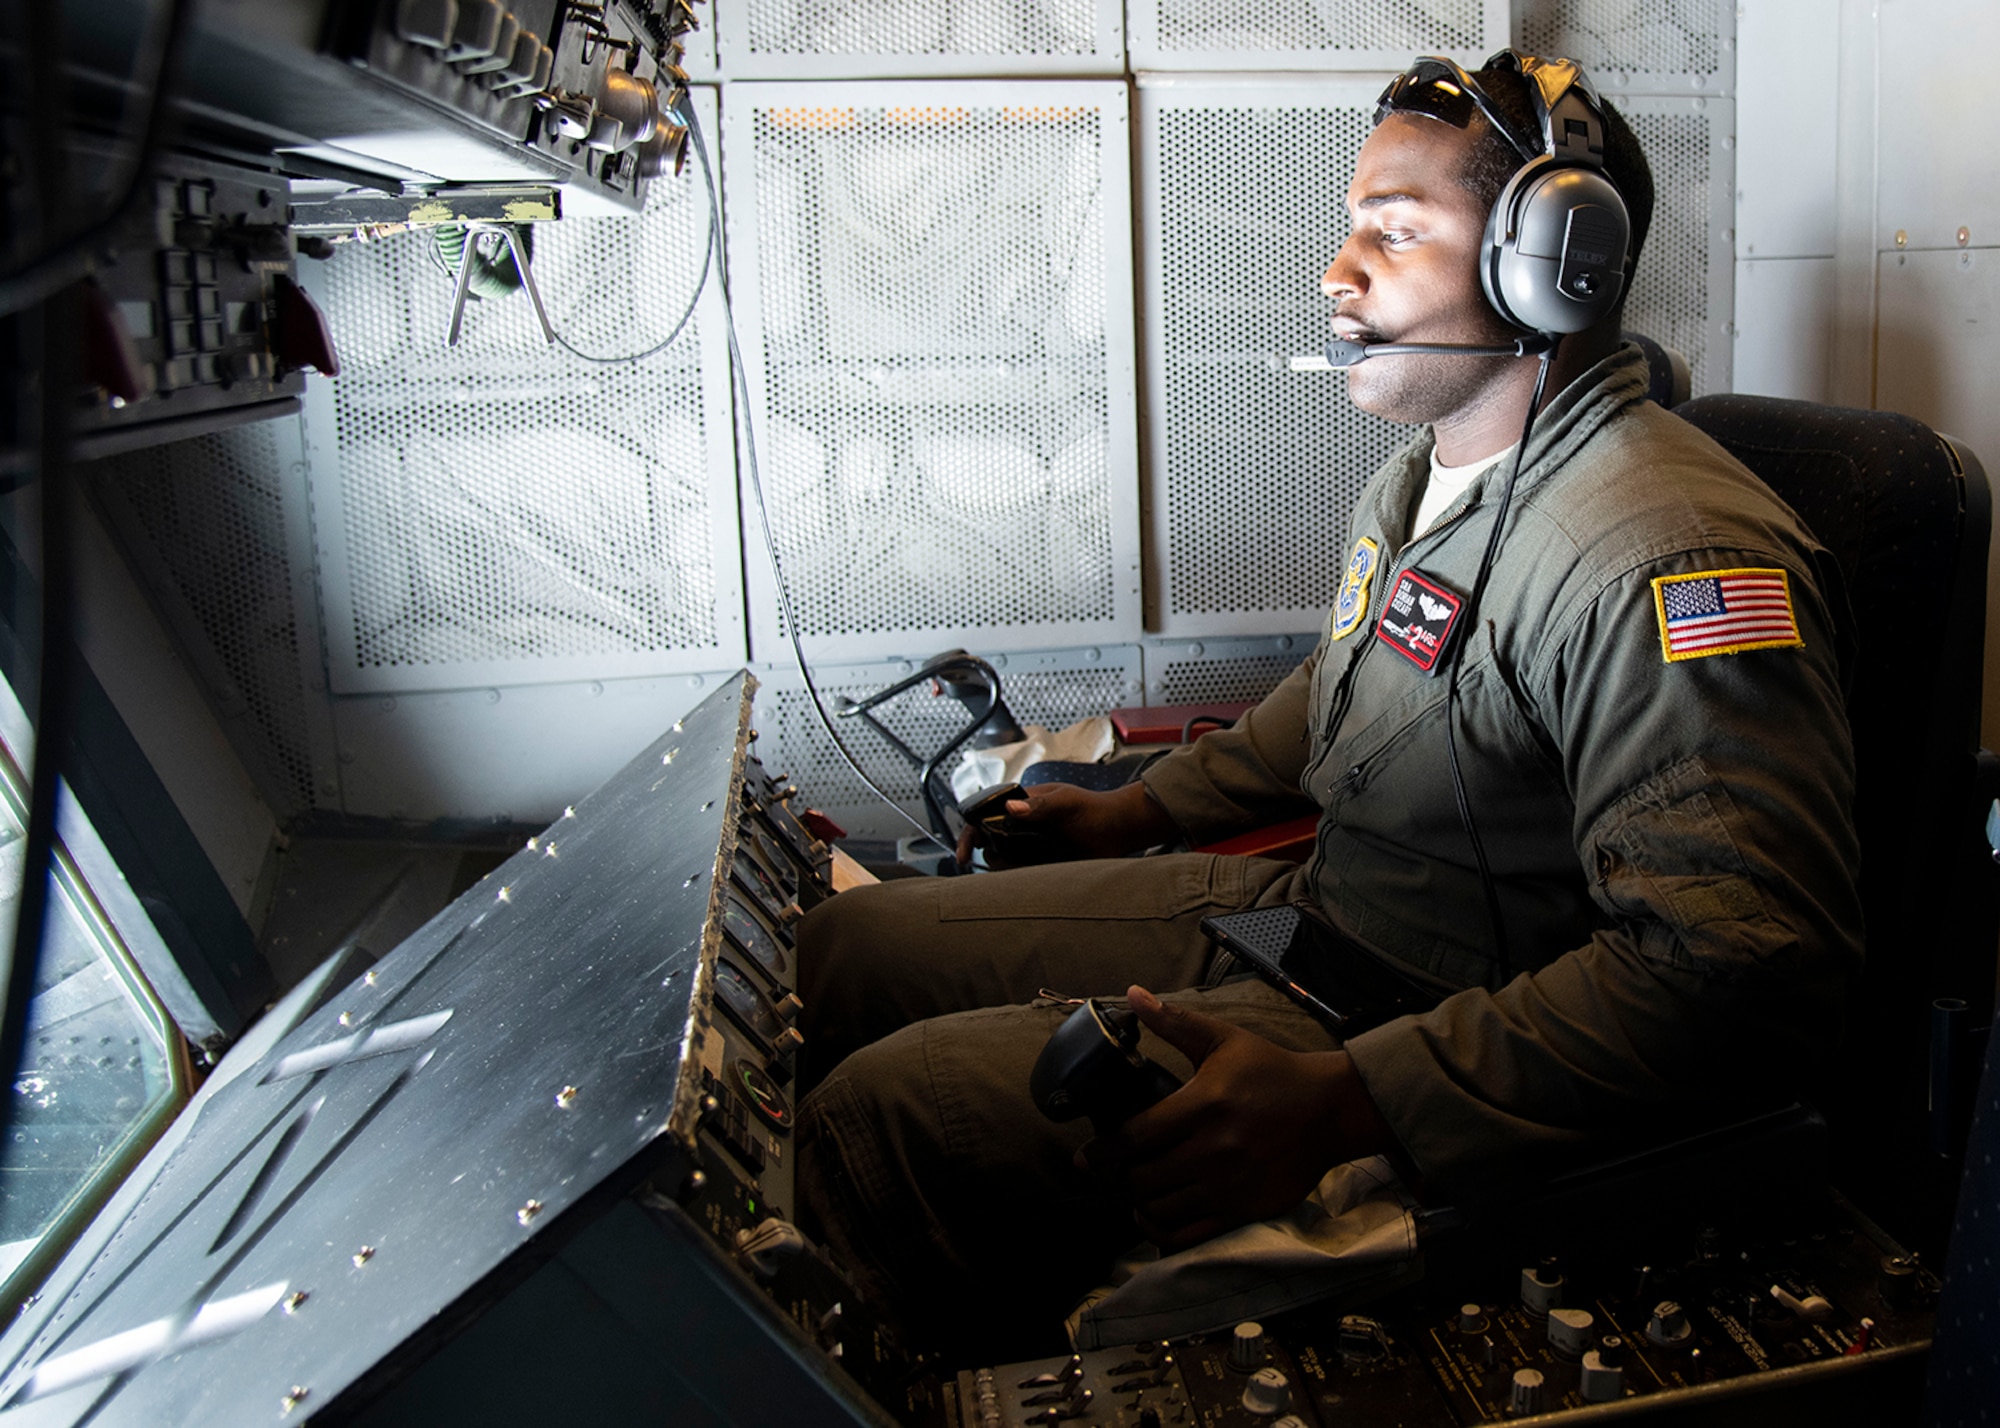 Senior Airman Dorian Cozart, boom operator with the 2nd Air Refueling Squadron, operates the boom on a KC-10 Extender March 7, 2019, during Exercise Jersey Devil 19. Jersey Devil was aimed at preparing Airmen to respond to complex threats anywhere, anytime. (U.S. Air Force photo by Airman 1st Class Zoe M. Wockenfuss)